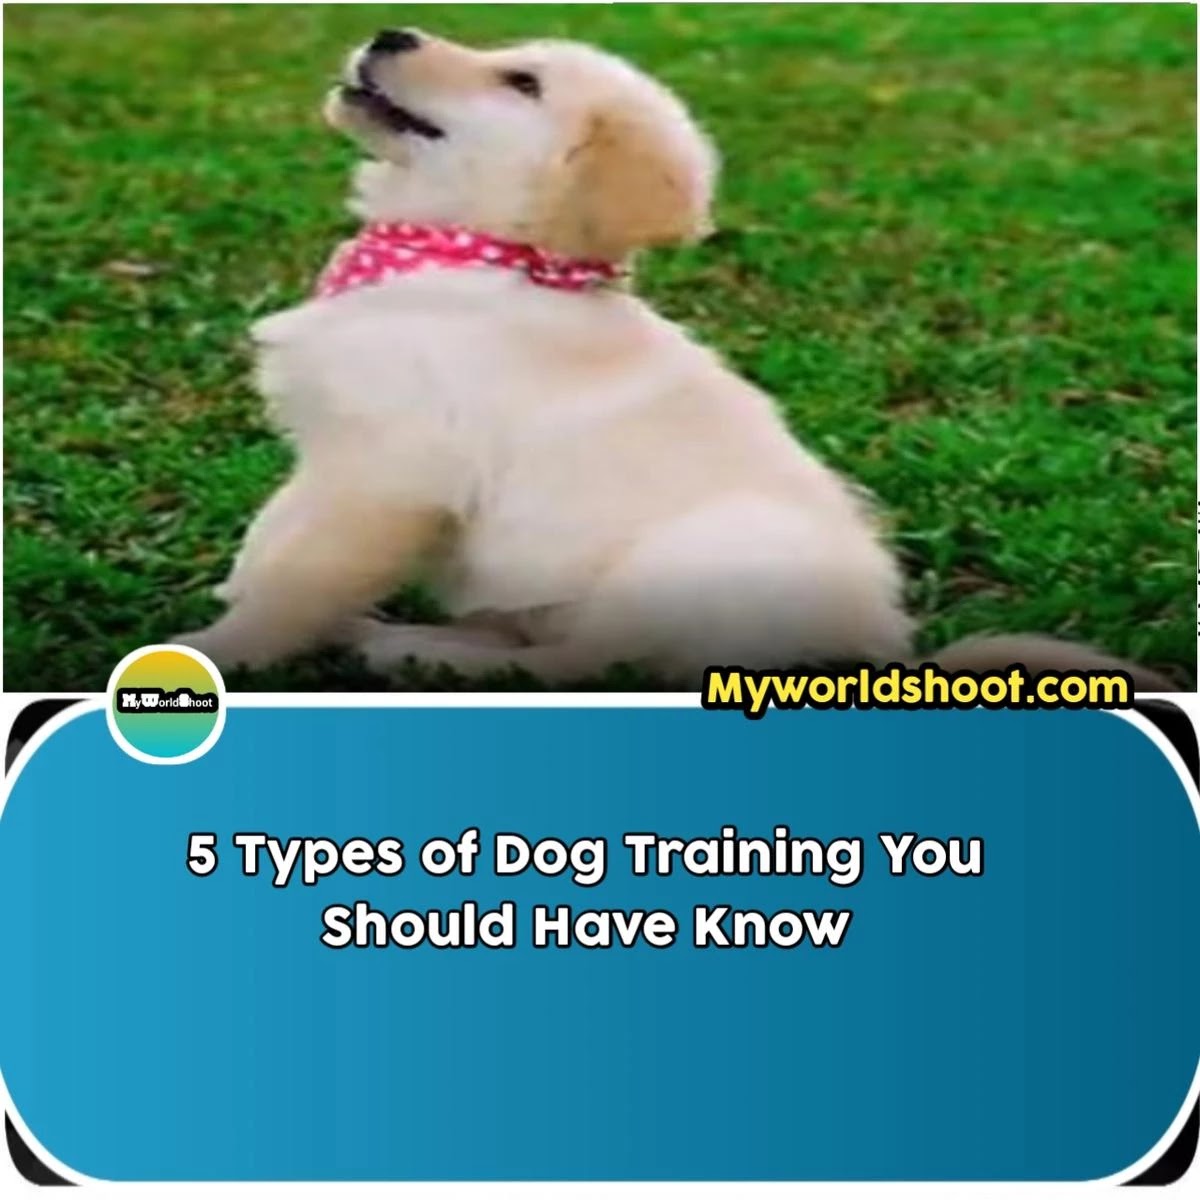 5-Types-of-Dog-Training-You-Should-Have-Know